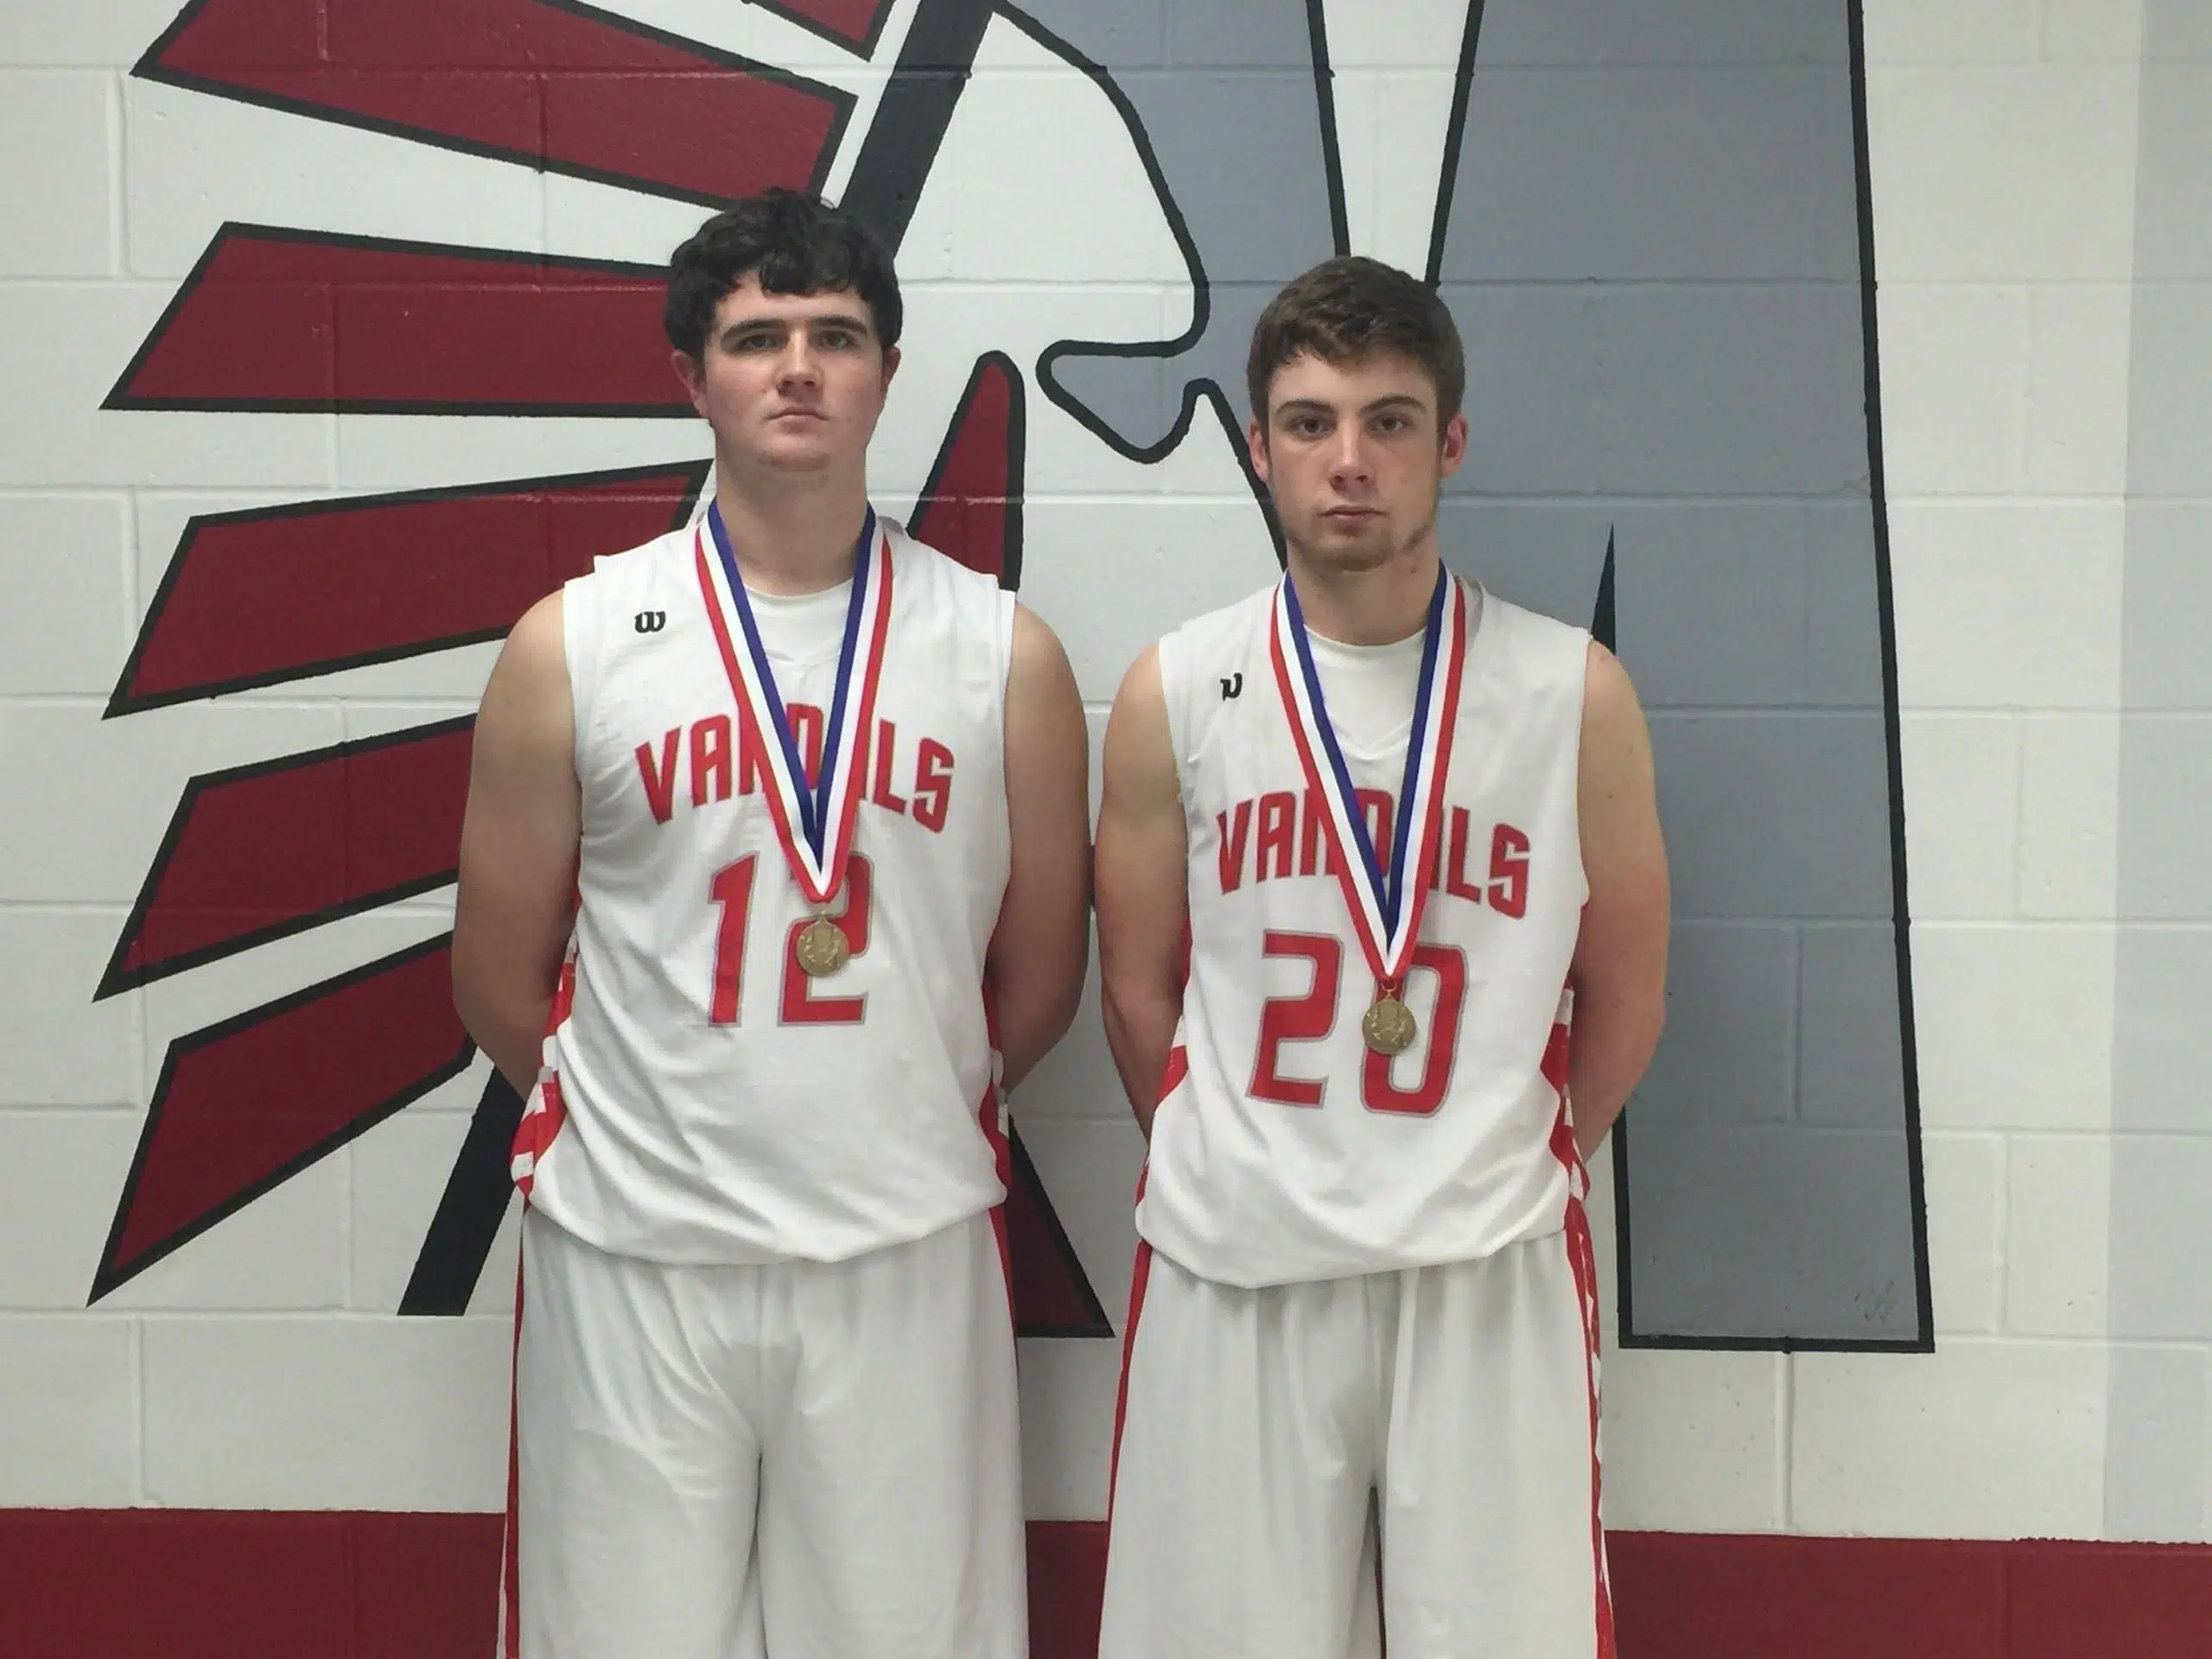 Vandals win in final game at Morrisonville Tournament, results from last night at NTC Tourney